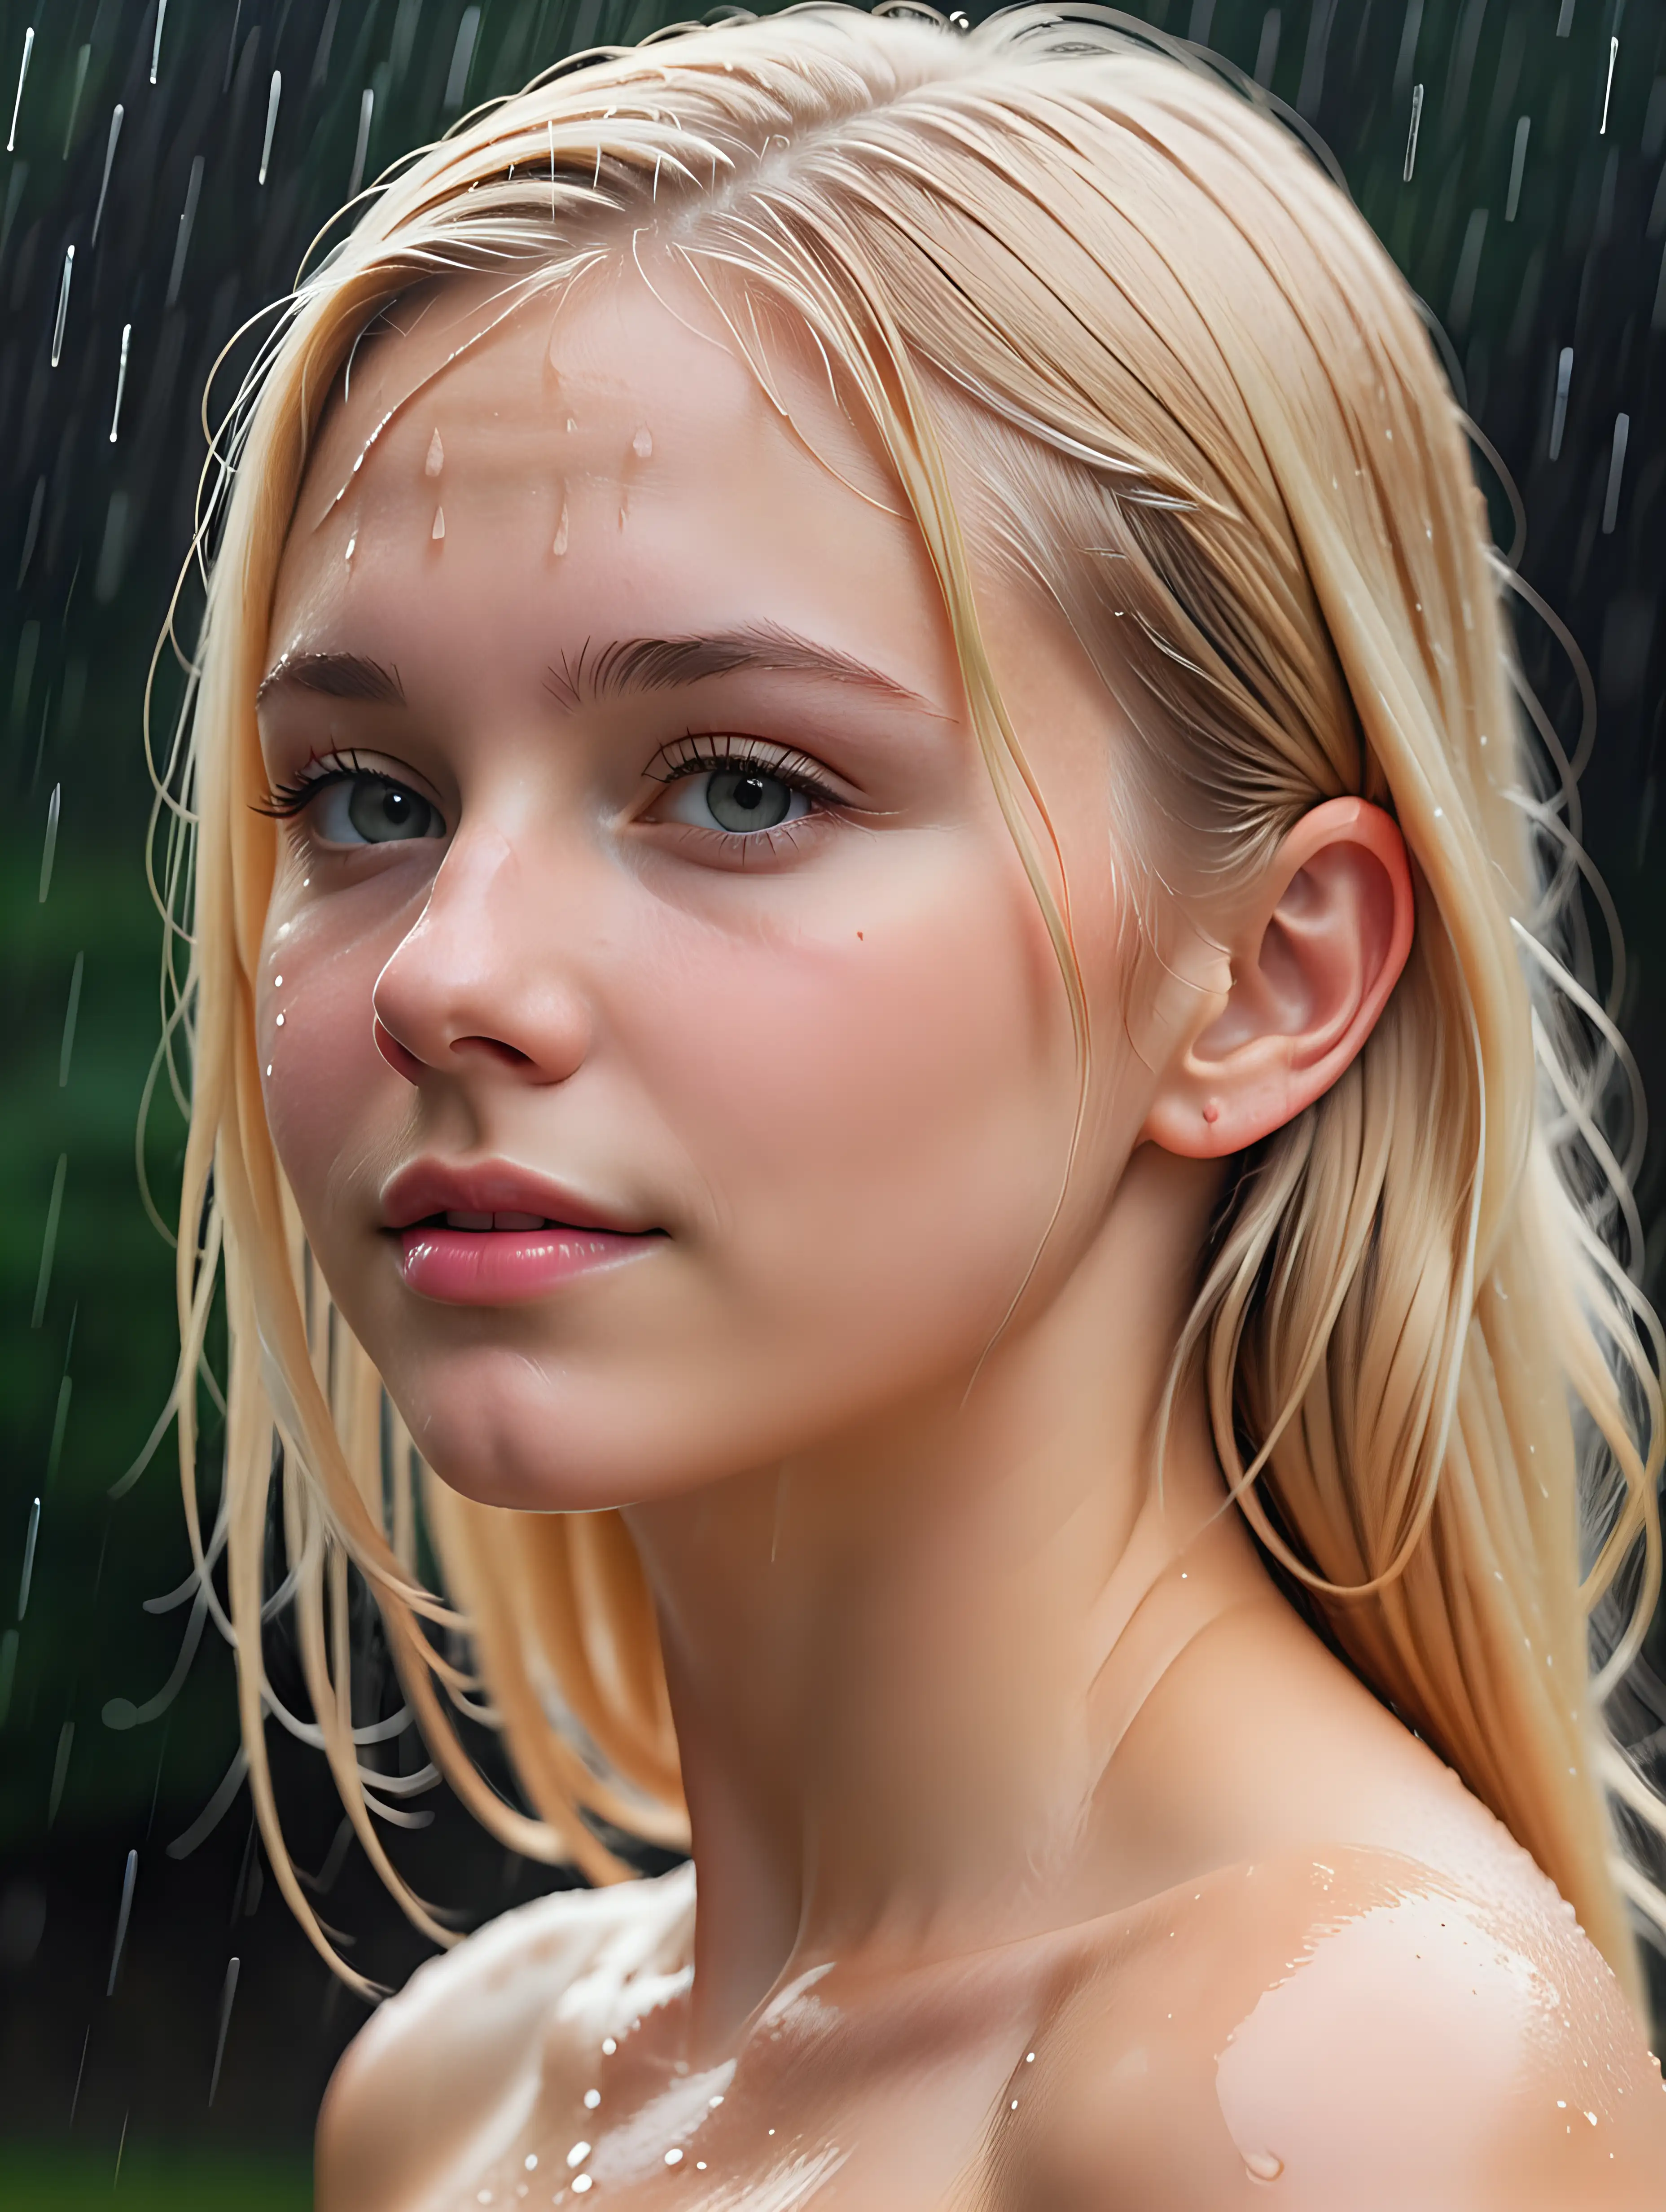 Blonde Woman Sensing Raindrops with Head Tilted Back